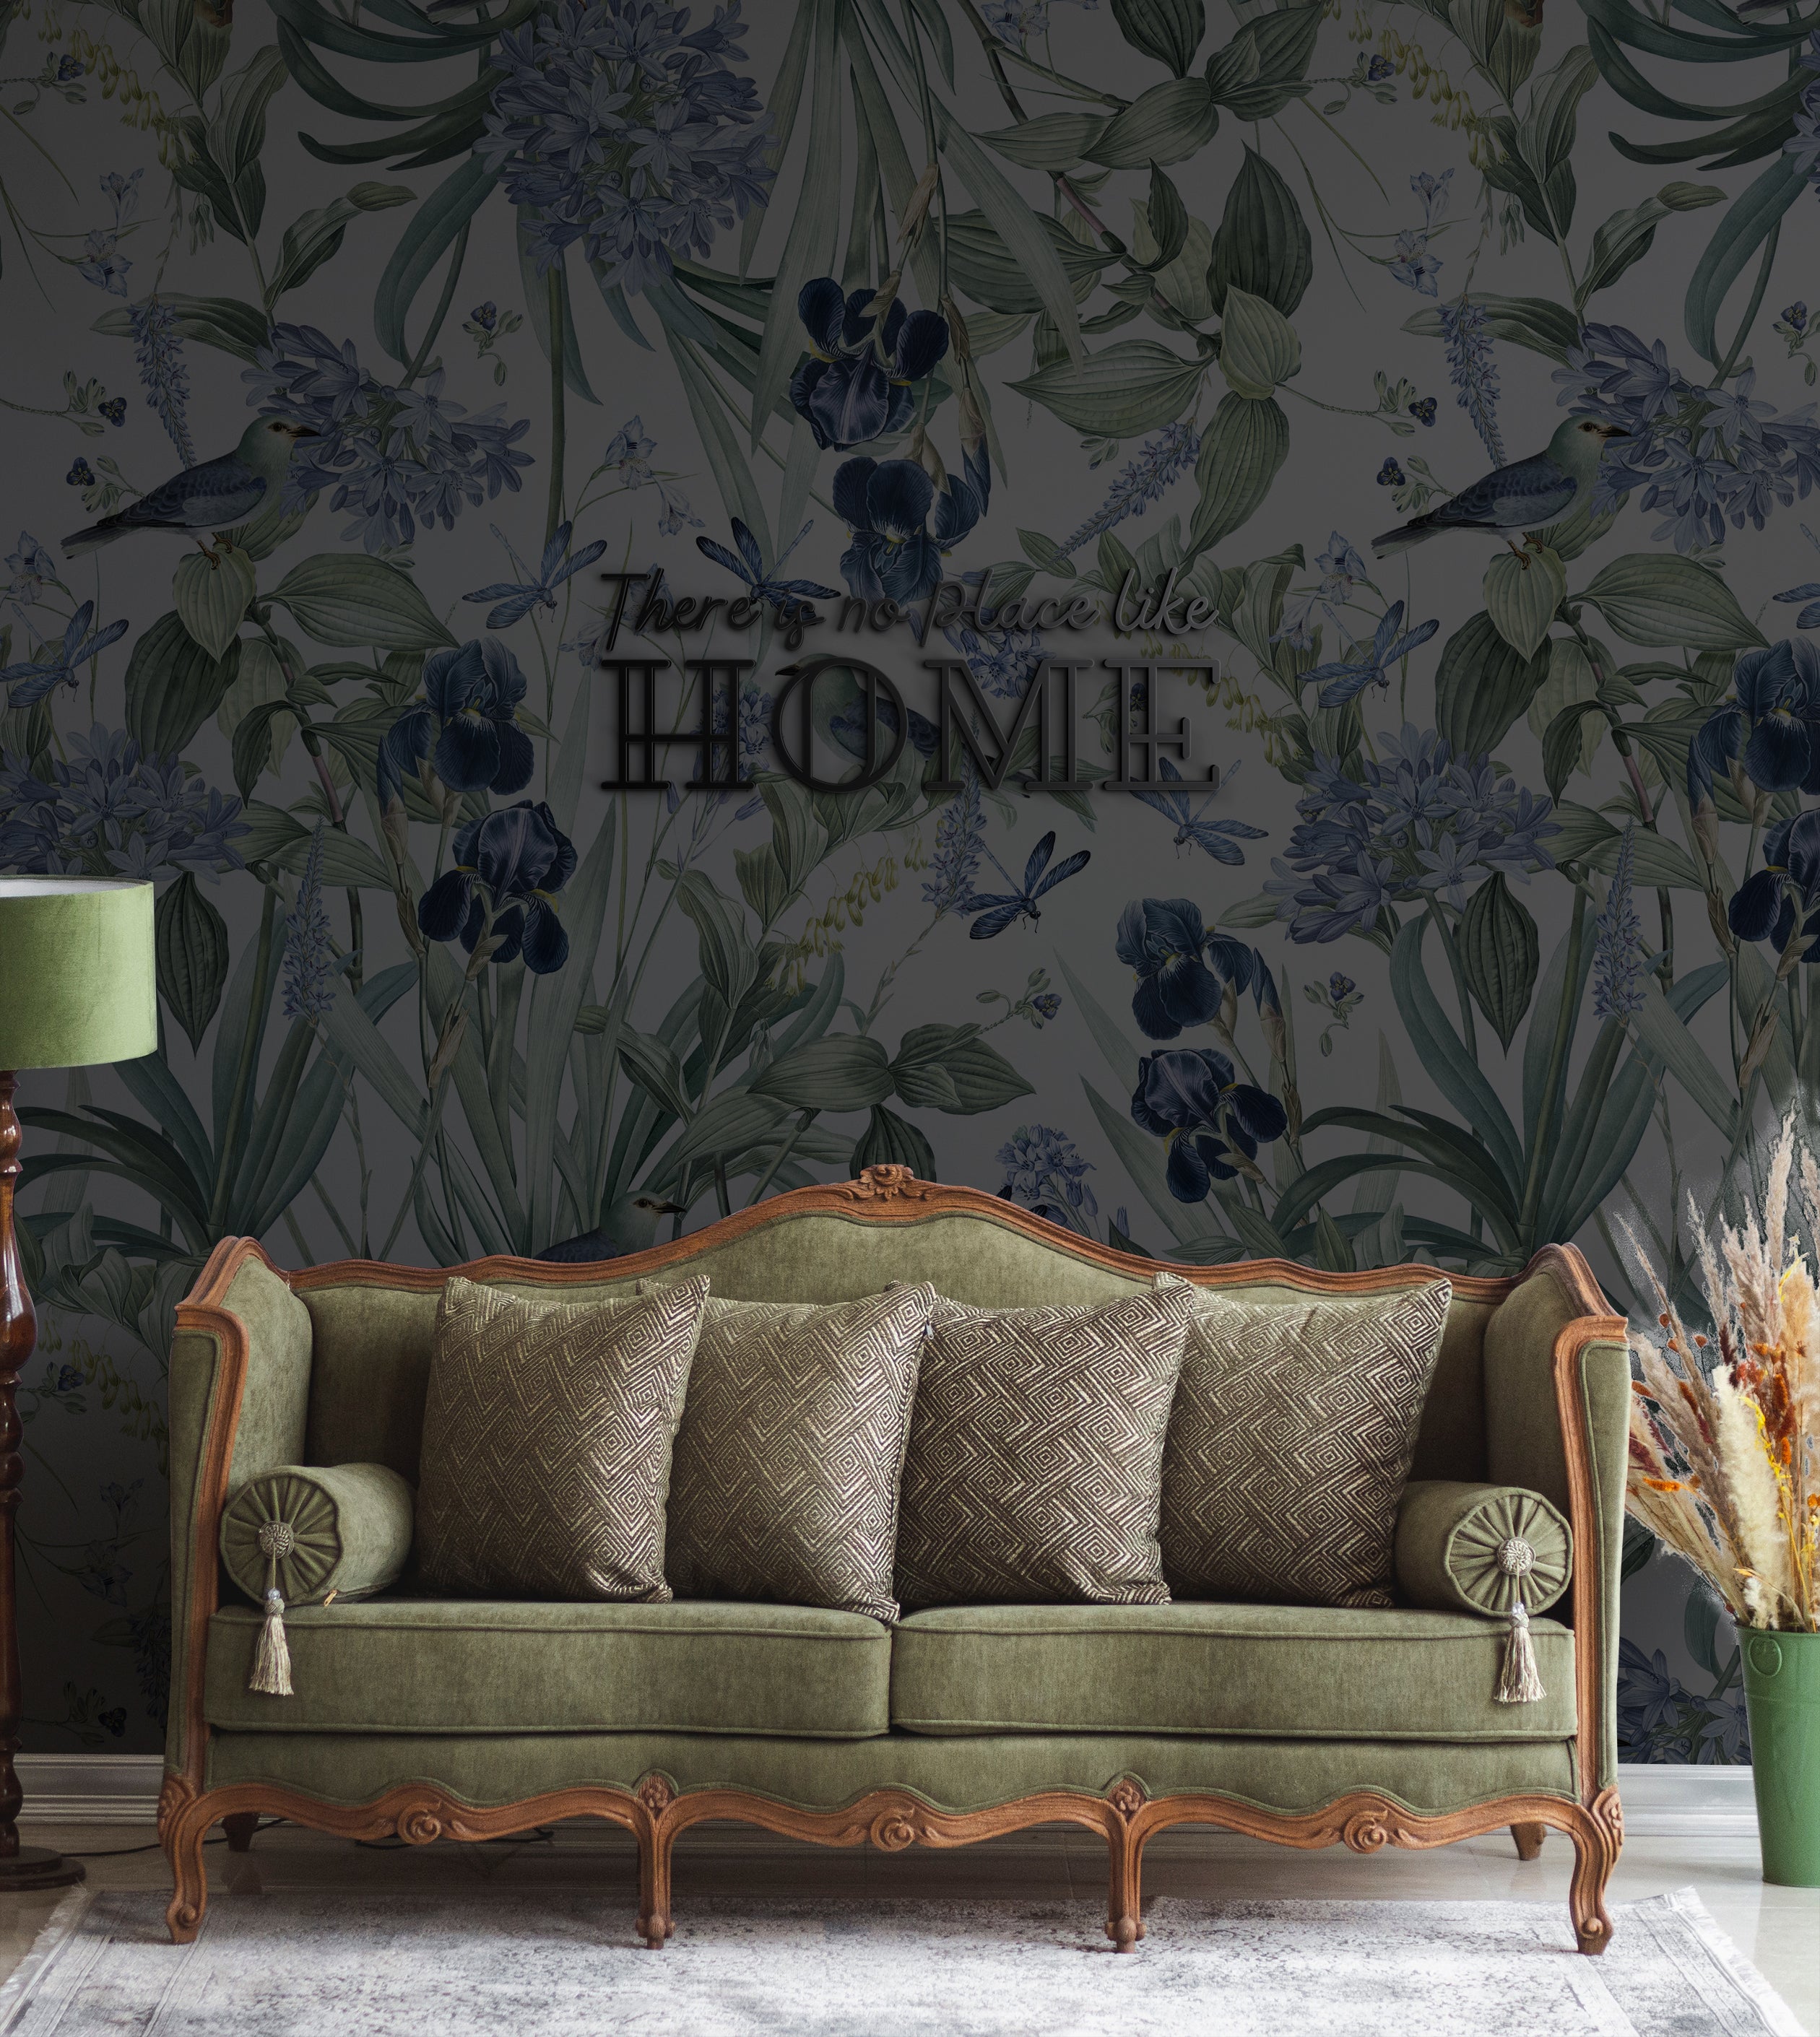 A stylish living room with a vintage green sofa, patterned cushions, and a floor lamp. The wall behind the sofa is adorned with Mint Floral Wallpaper on a slate background, showcasing detailed illustrations of leaves, blue flowers, birds, and dragonflies.